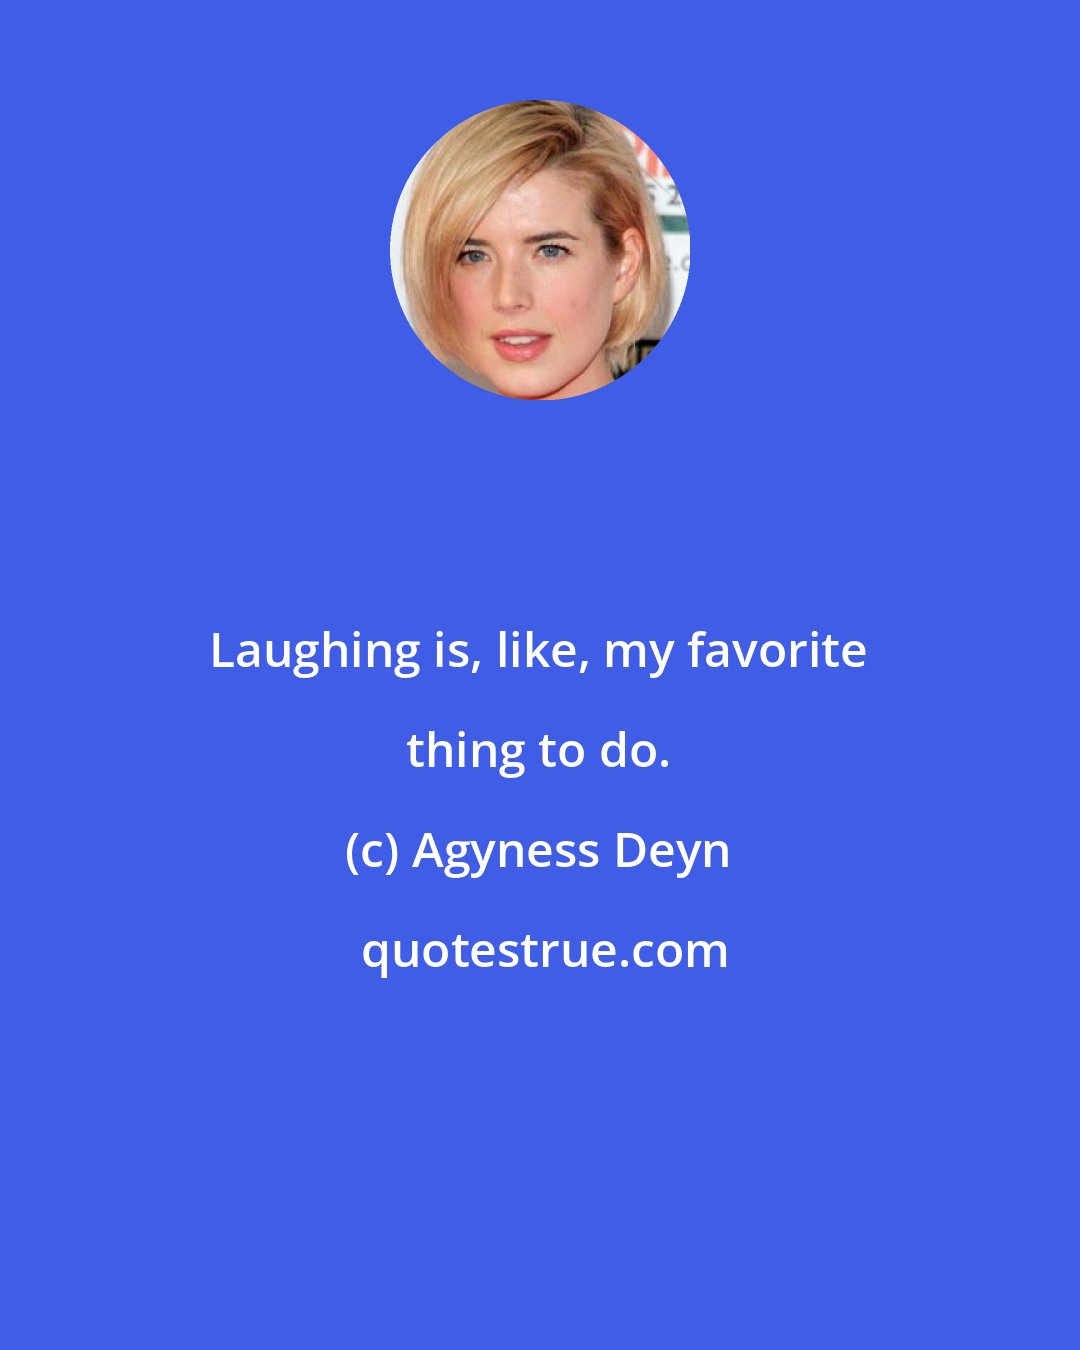 Agyness Deyn: Laughing is, like, my favorite thing to do.